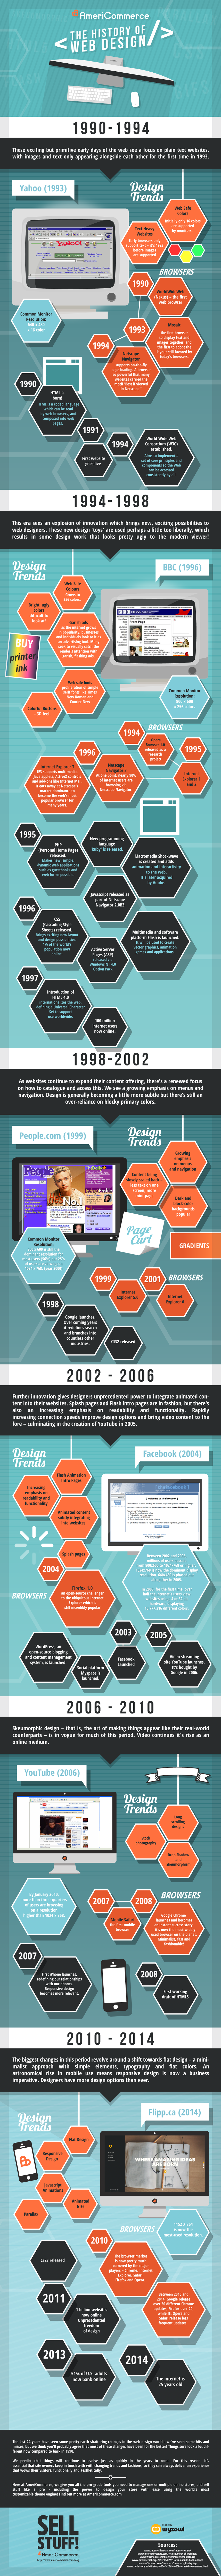 evolution of search engines Infographics